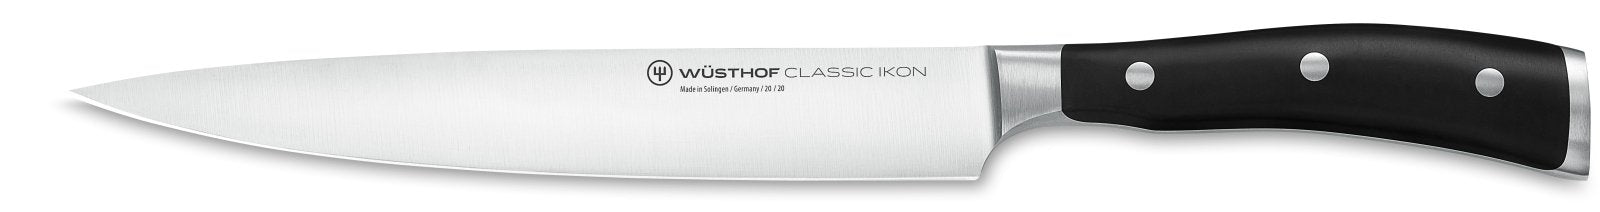 Wusthof Classic IKON 2 Piece Carving Set - WT1120360207 - The Cotswold Knife Company